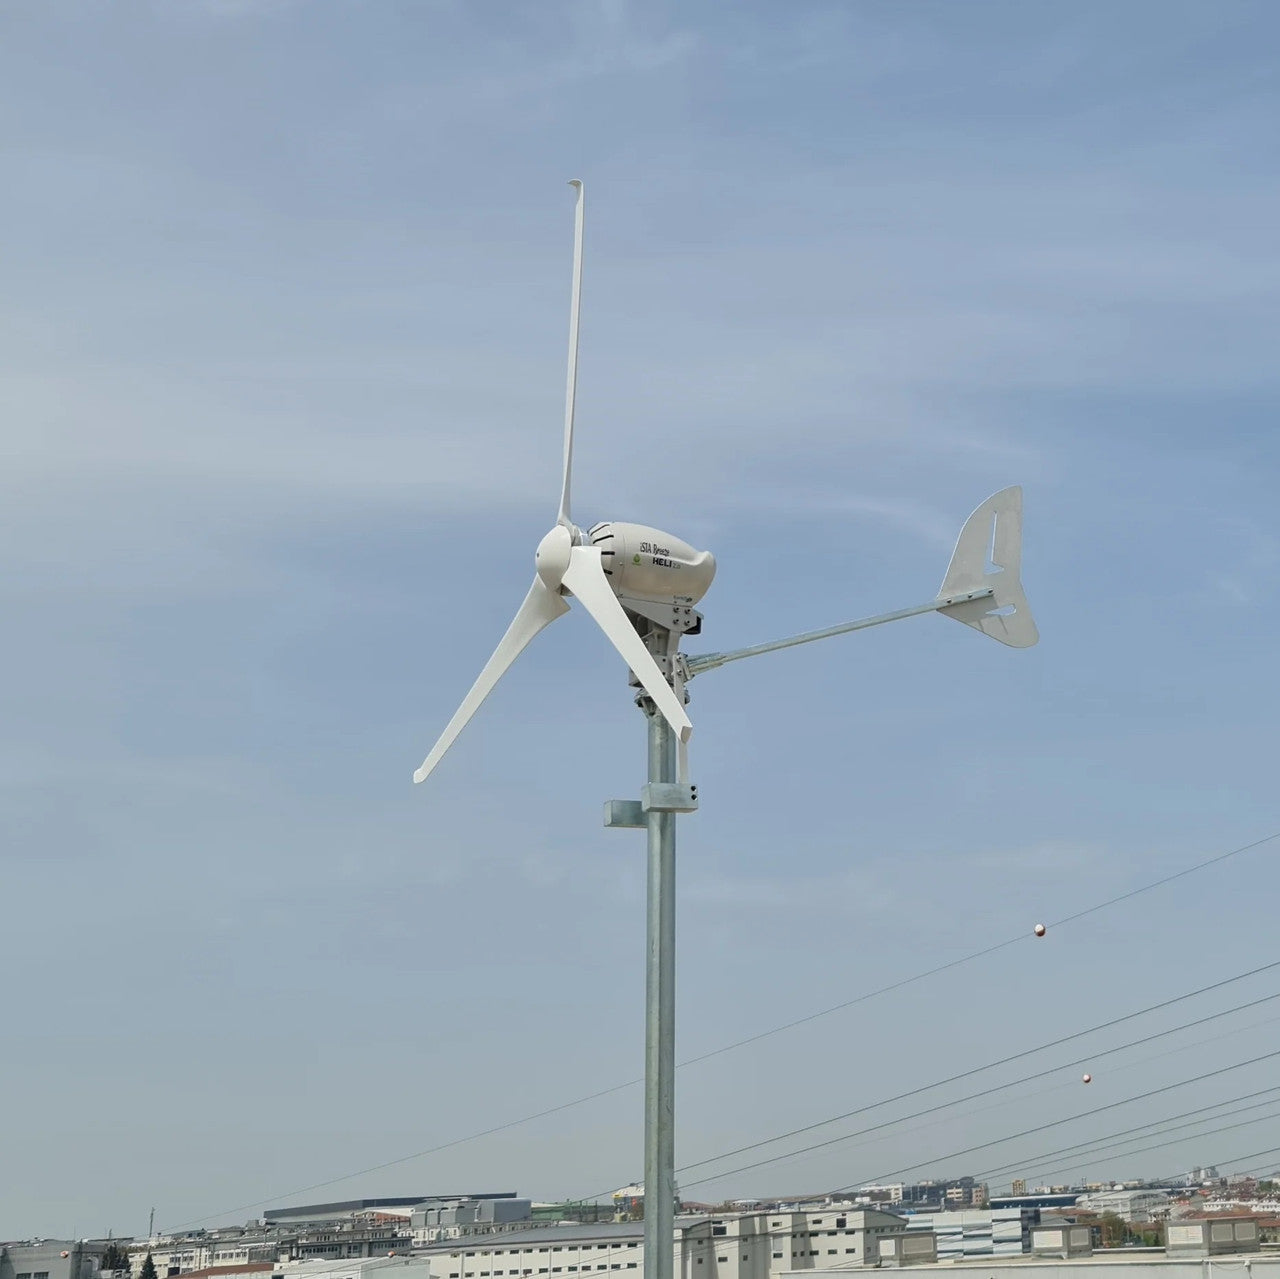 Kit Heli 2000W 48V Off-Grid Wind Turbine Wind Generator (with New Blade) & Charge Controller (for Lithium Battery)